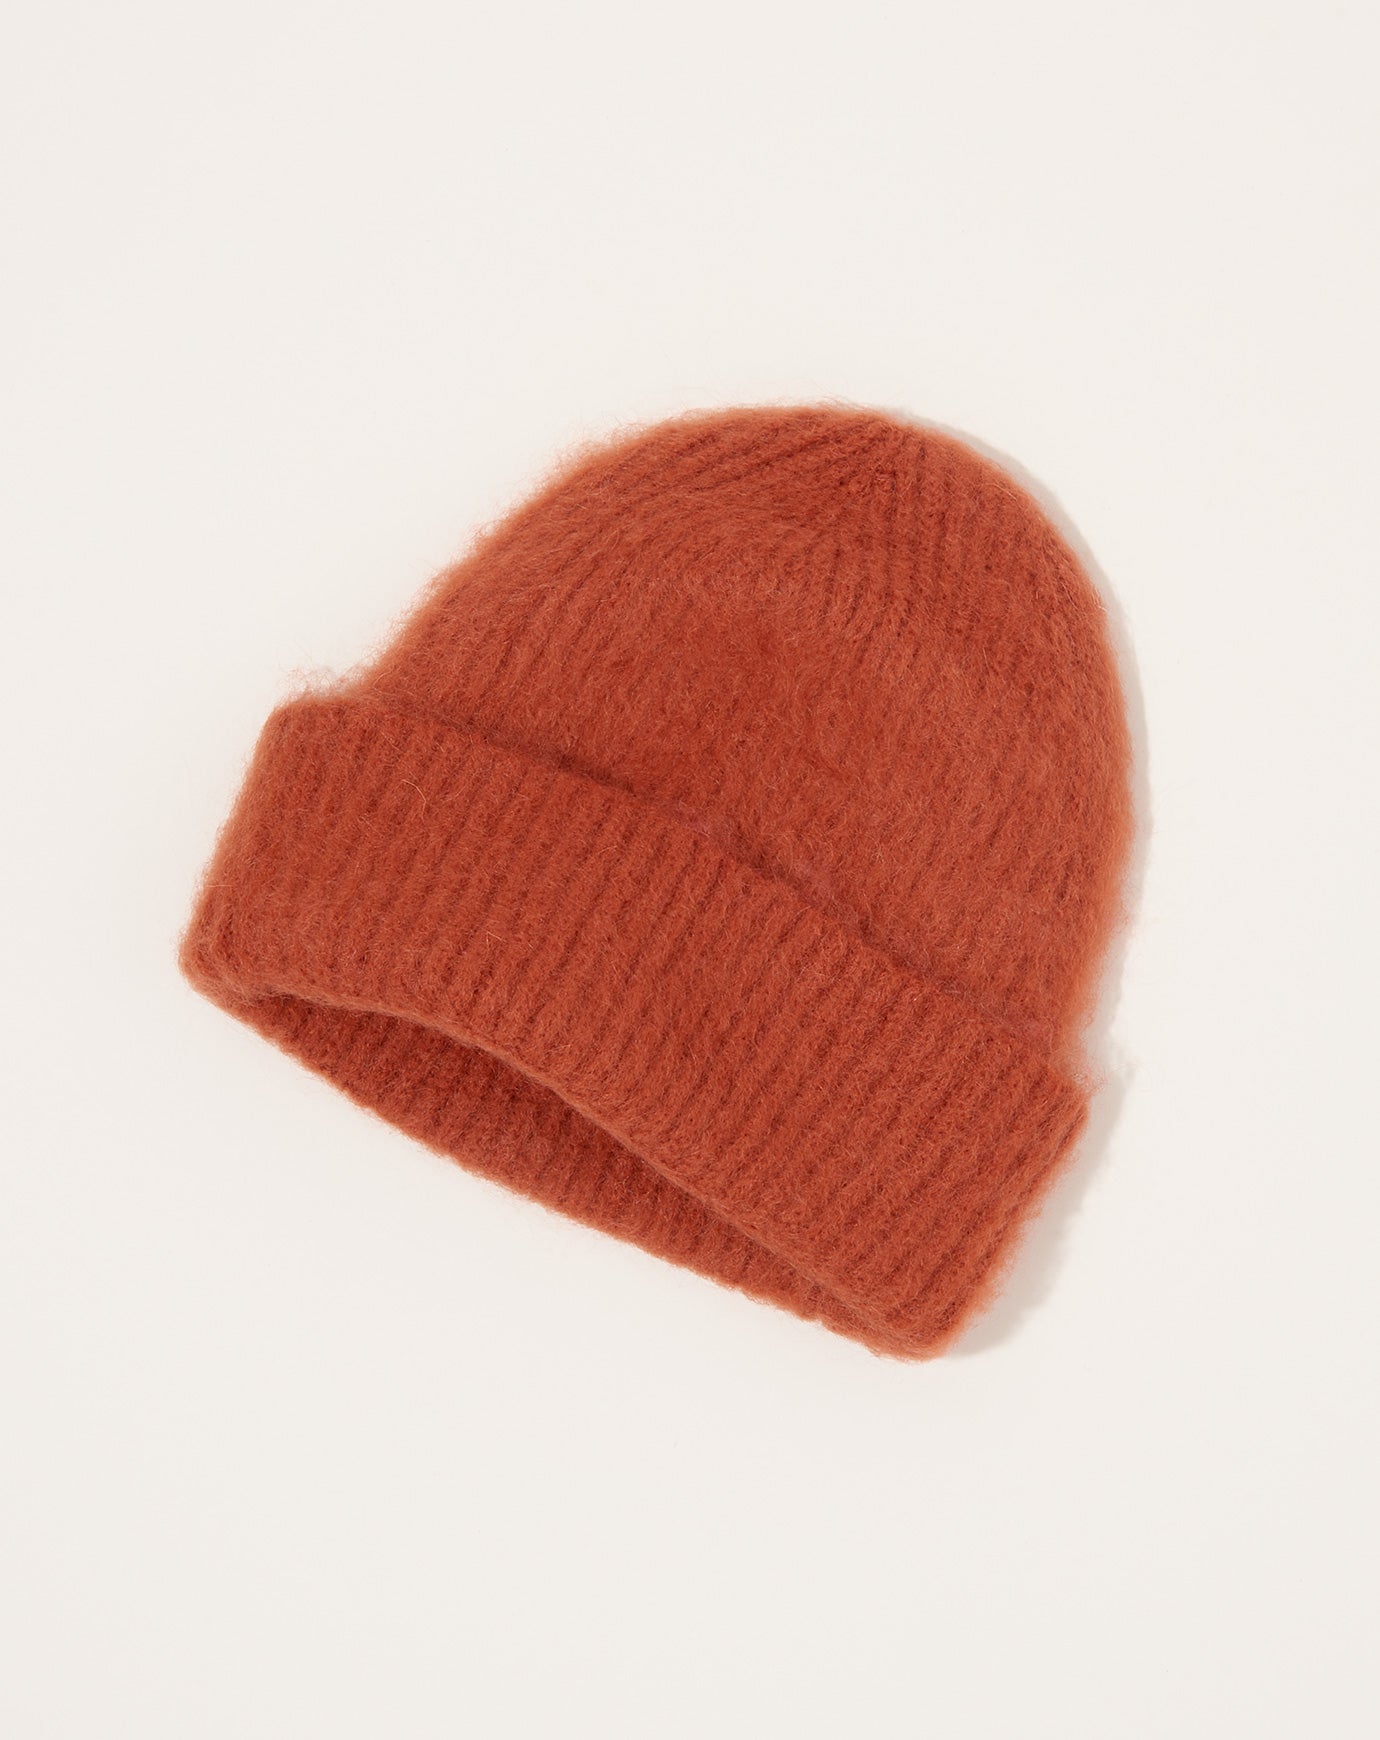 Exquisite J Mohair Wool Brushed Beanie in Rust